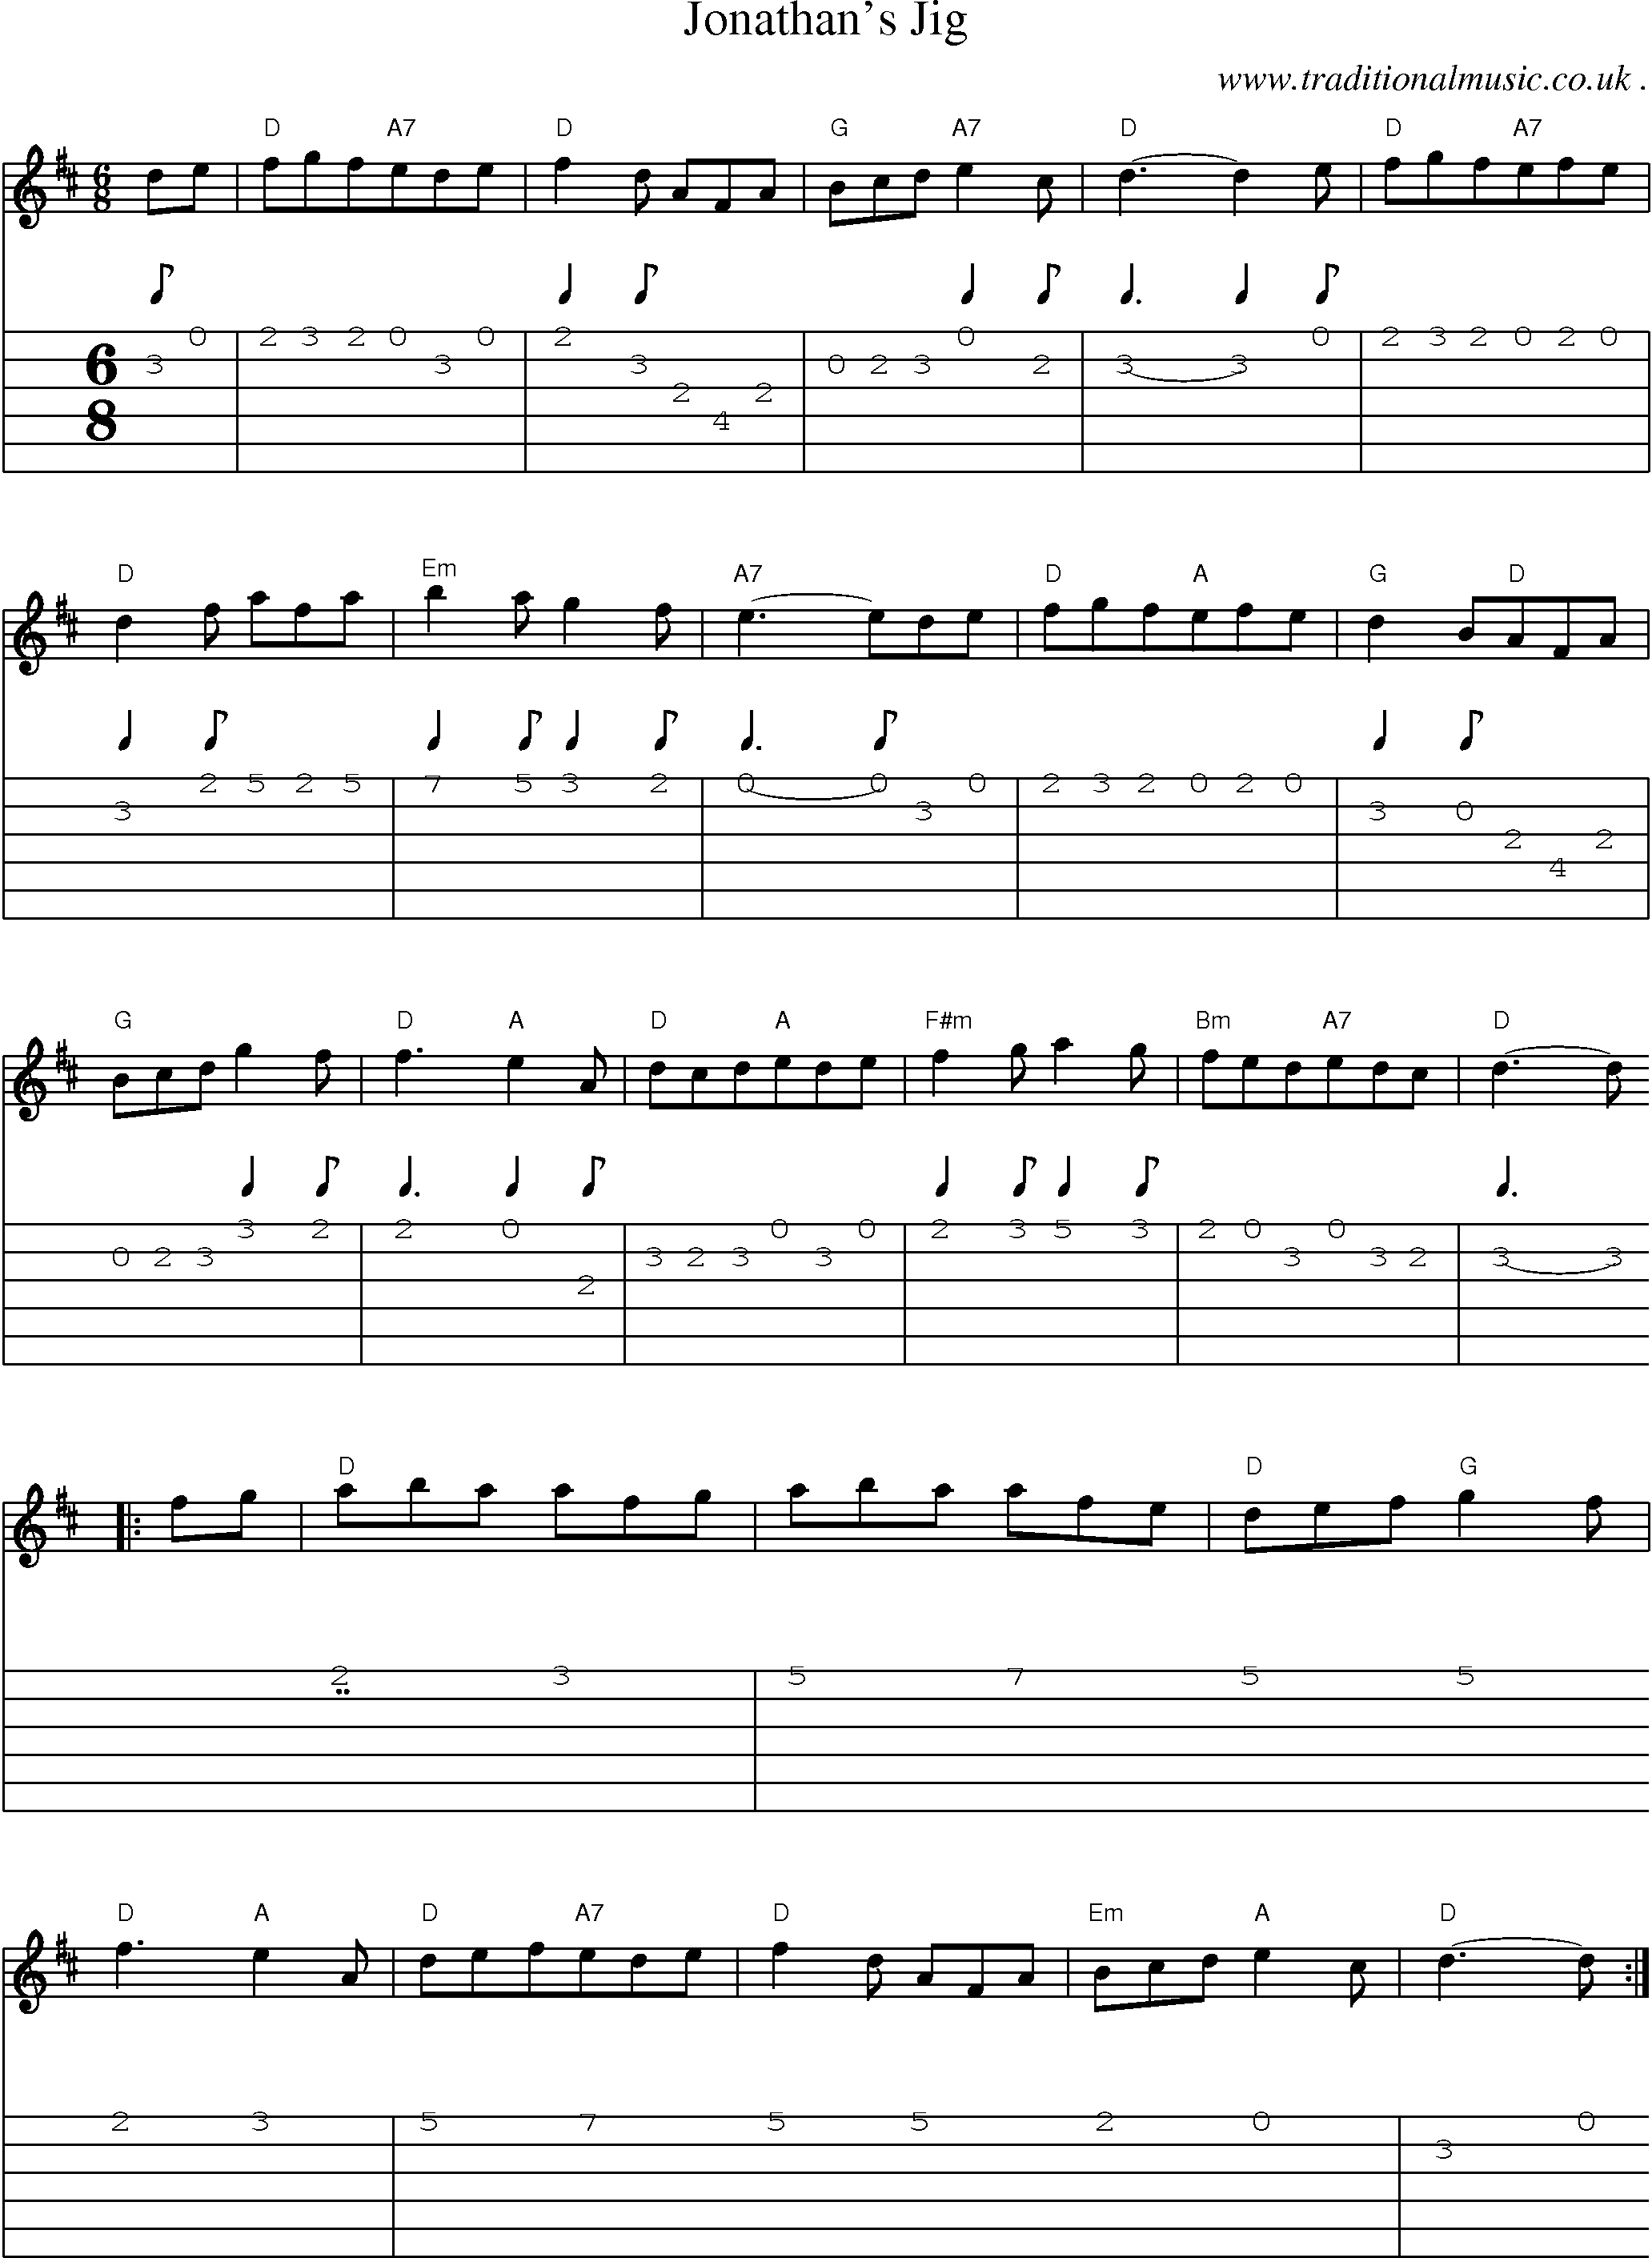 Sheet-Music and Guitar Tabs for Jonathans Jig